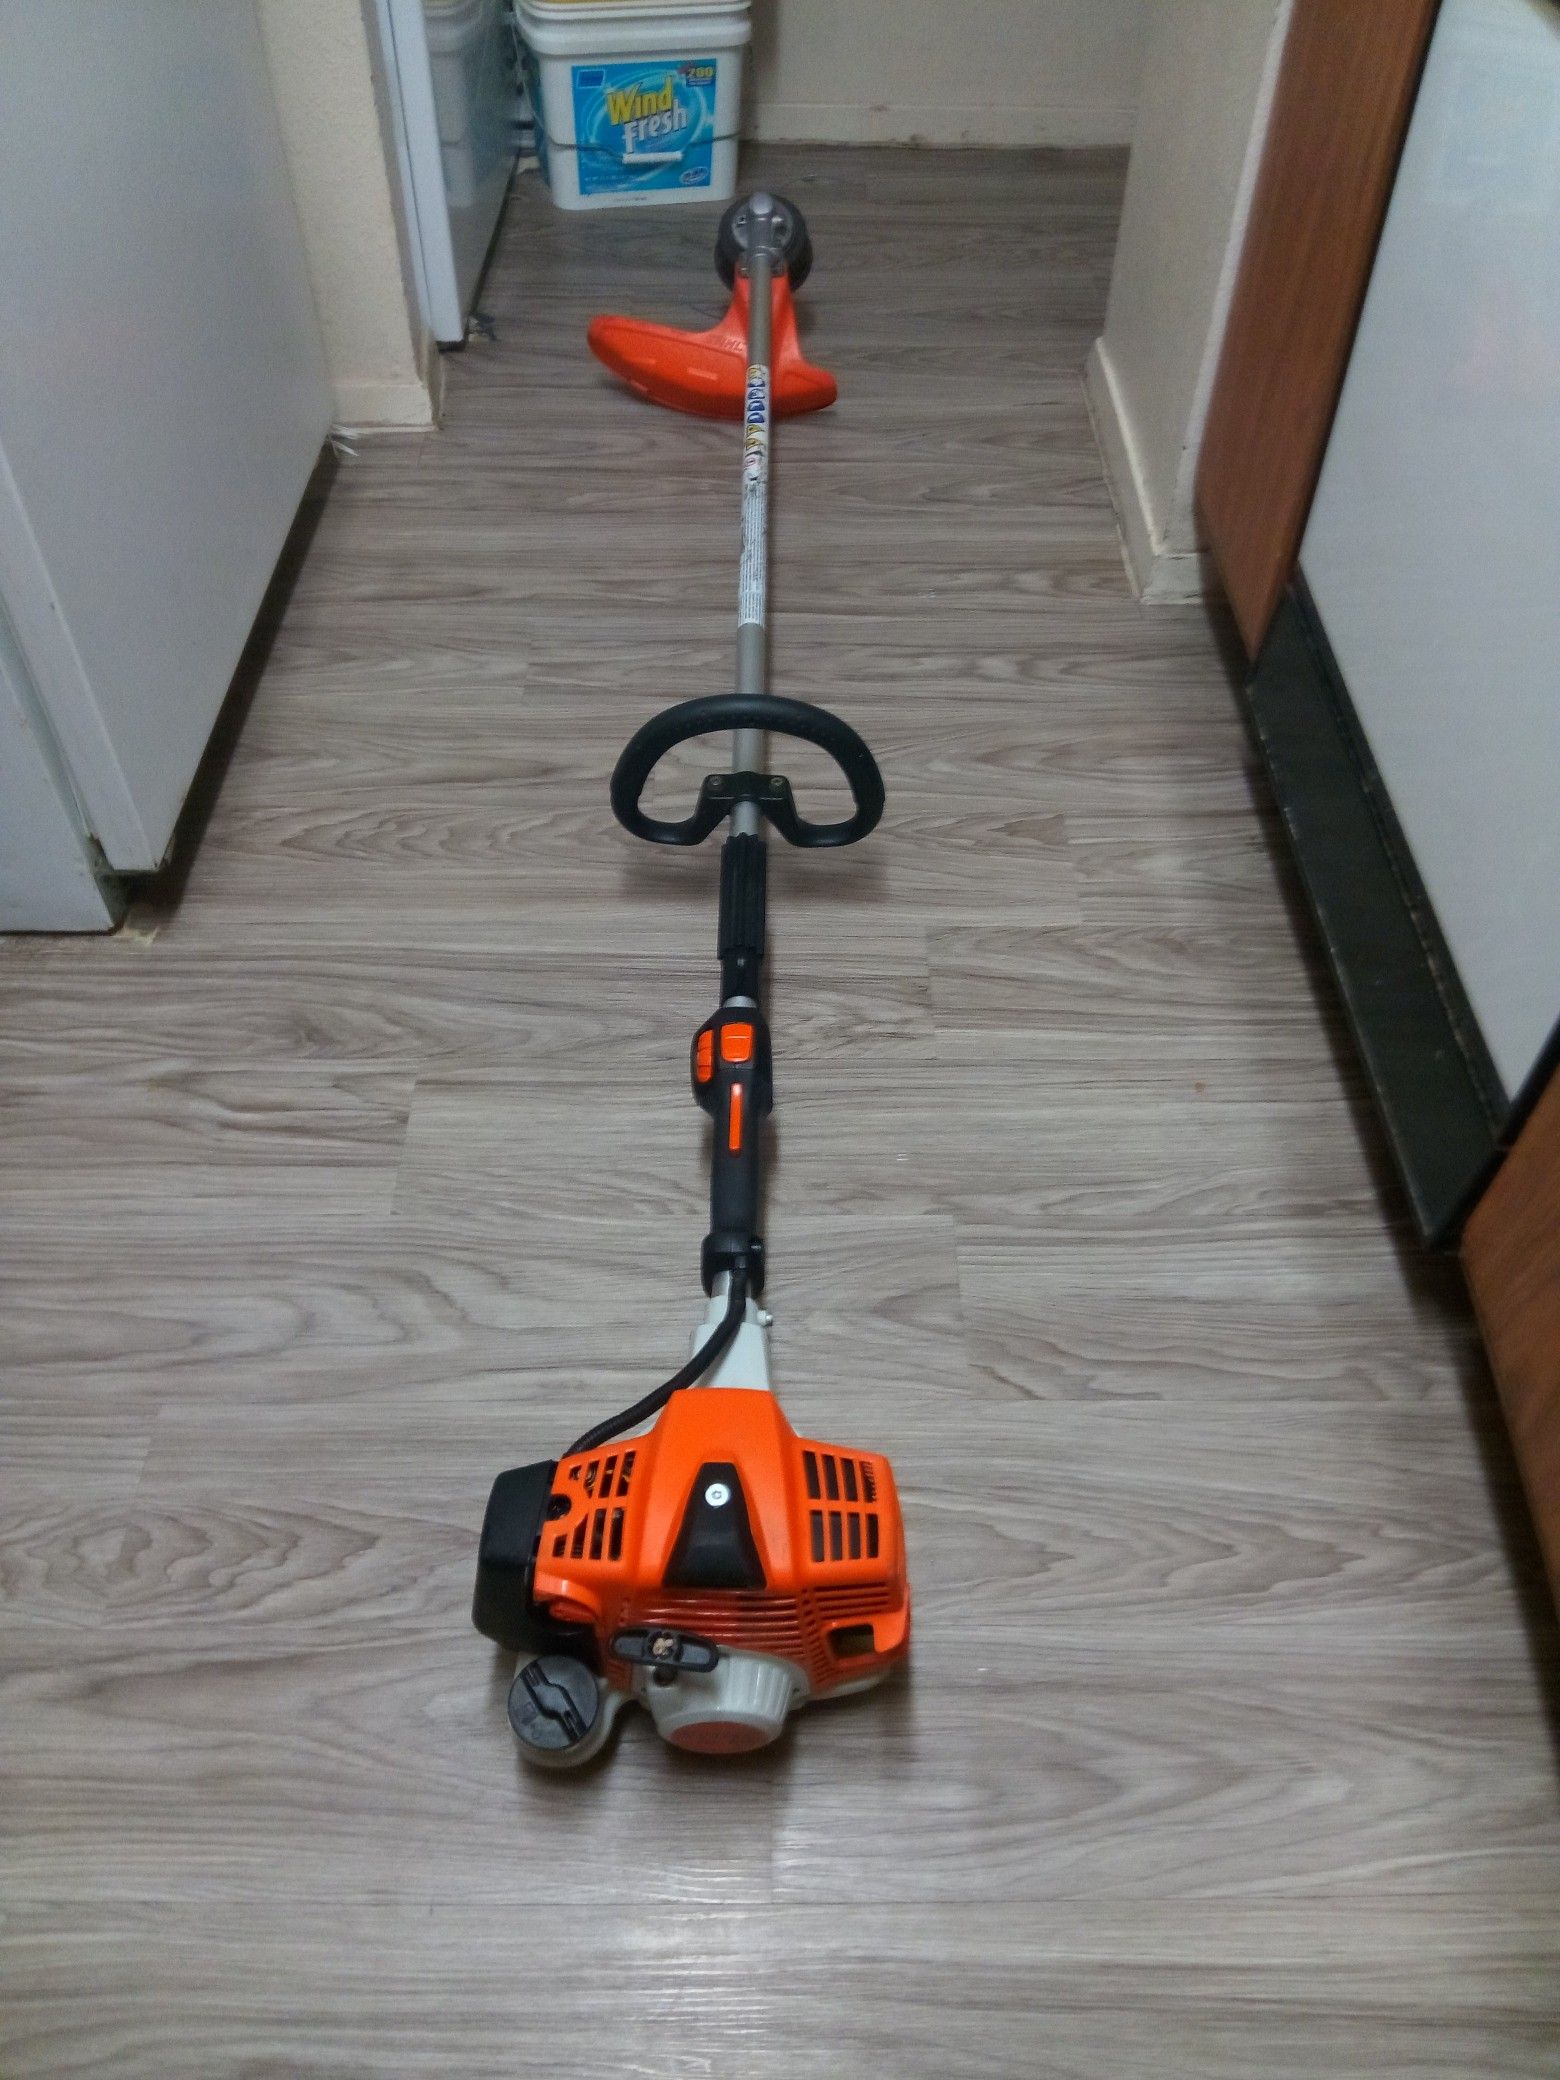 Stihl commercial weedeater